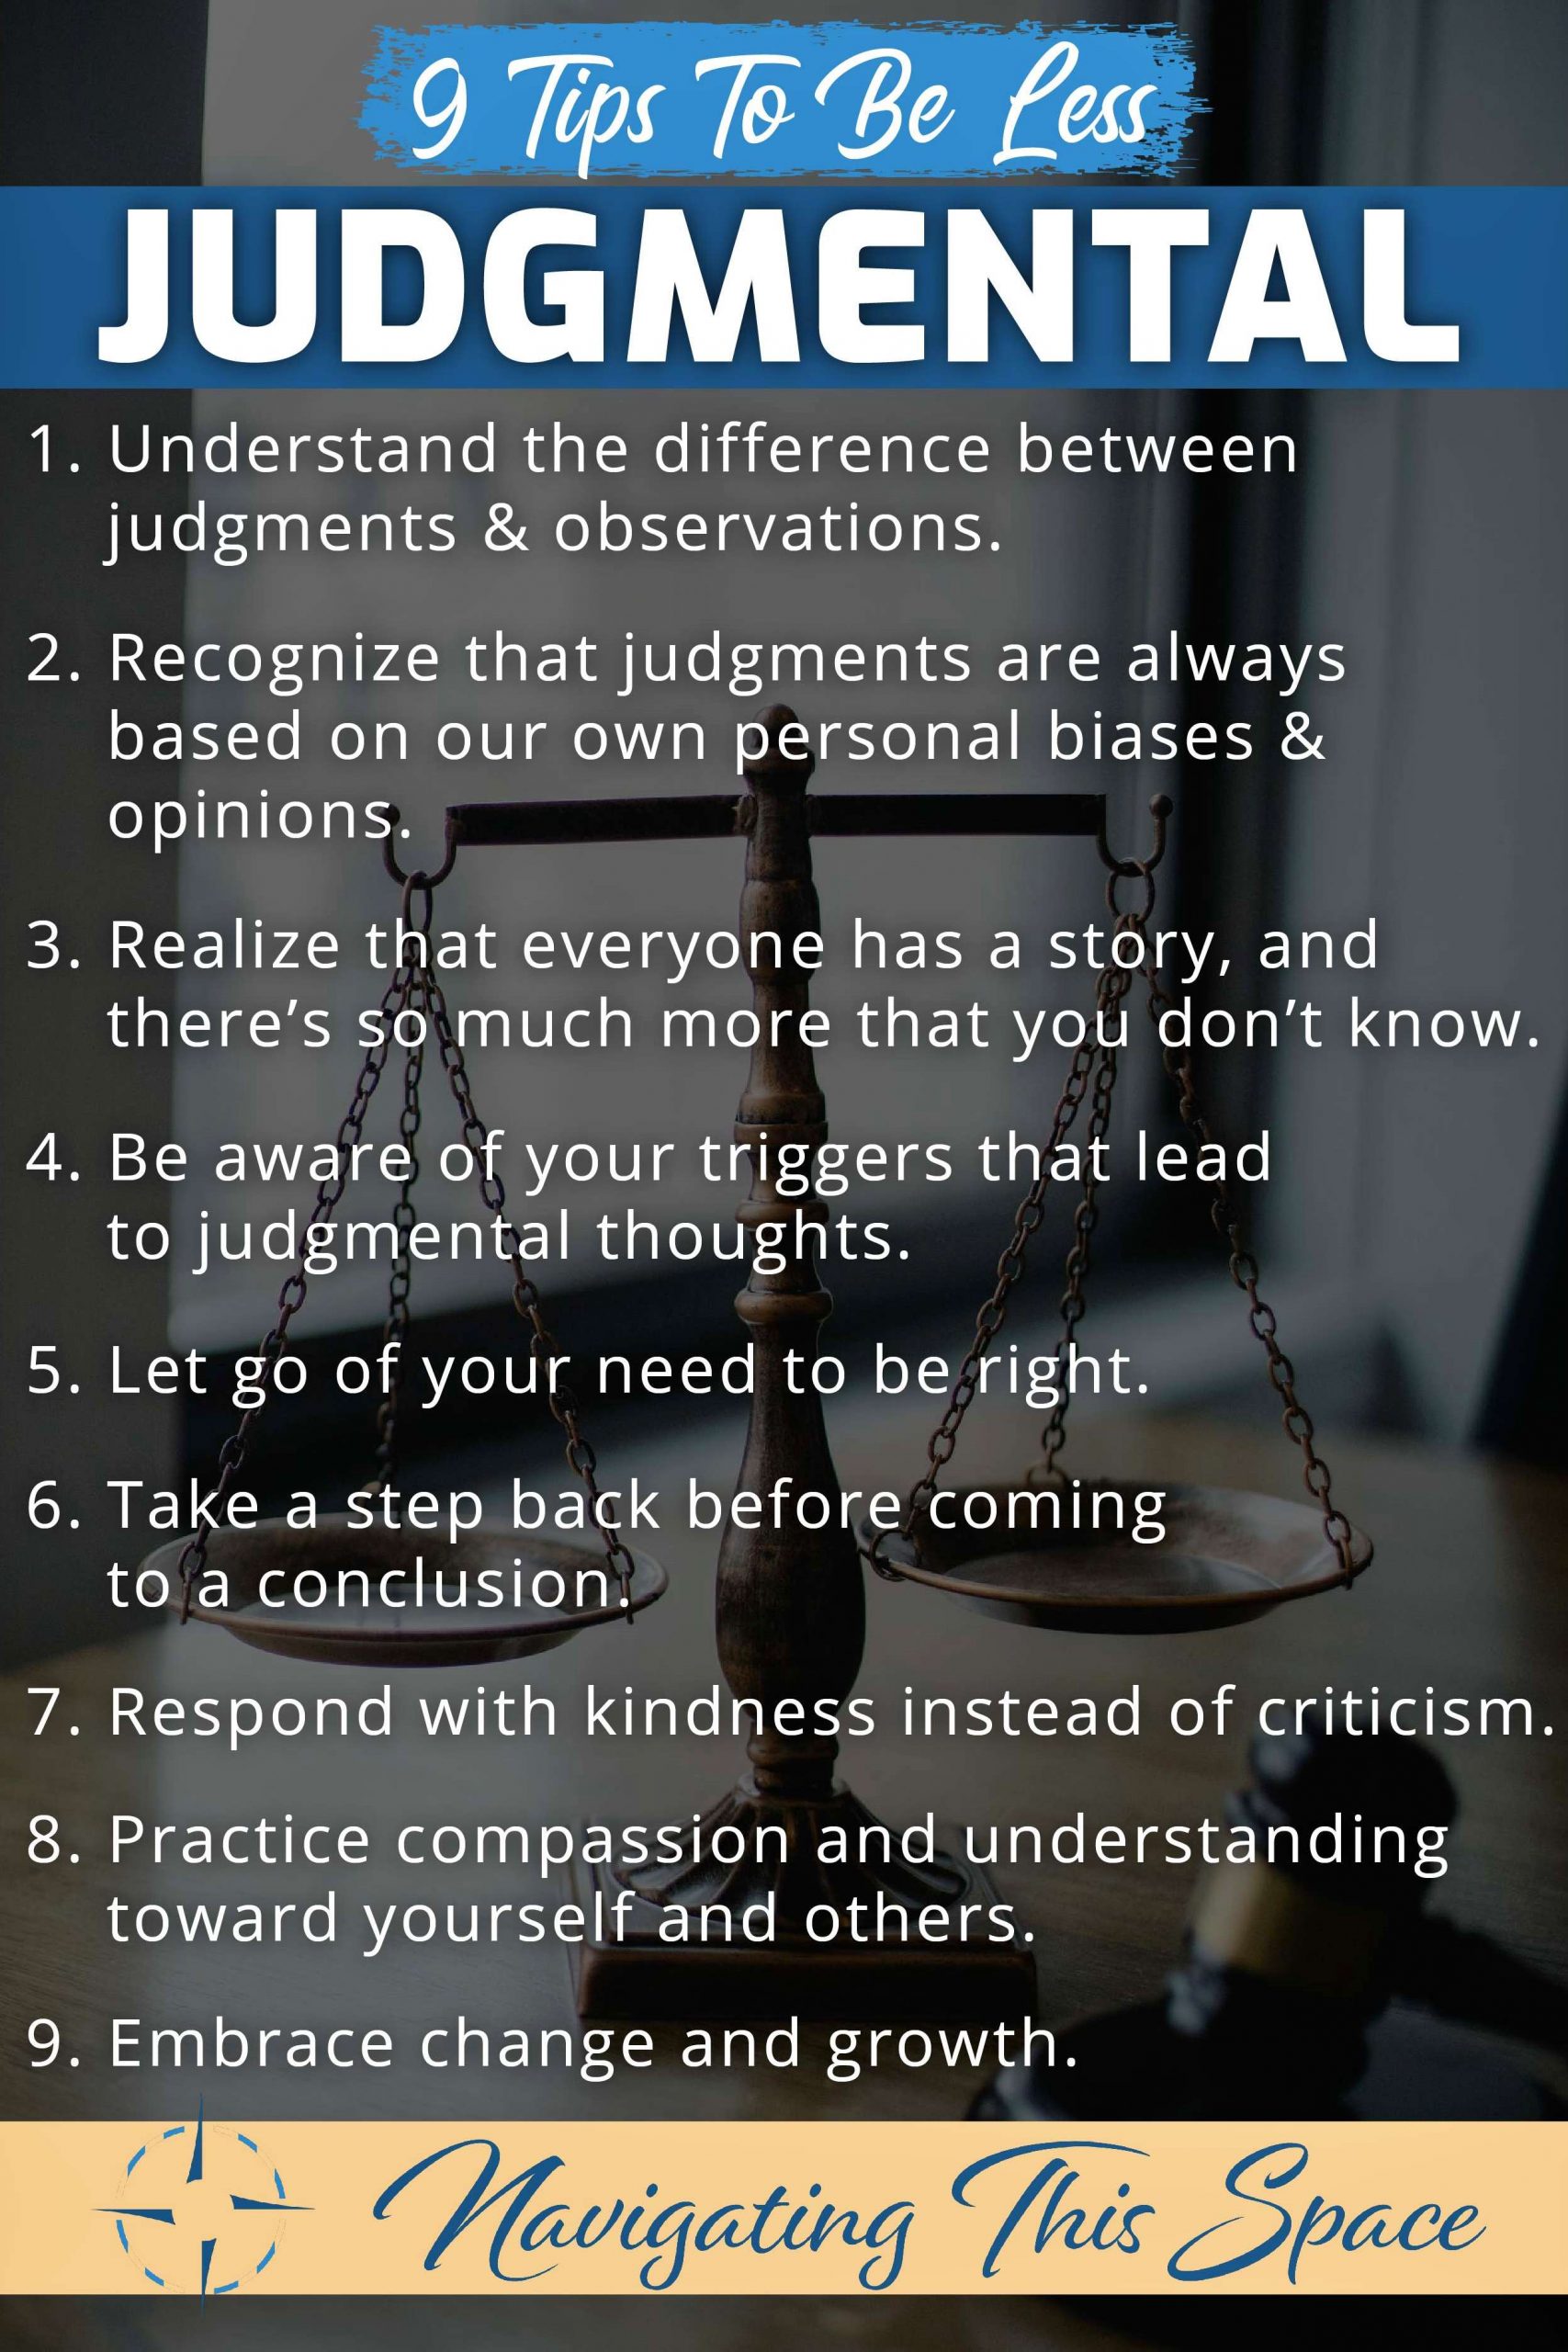 9 Tips On How To Be Less Judgmental